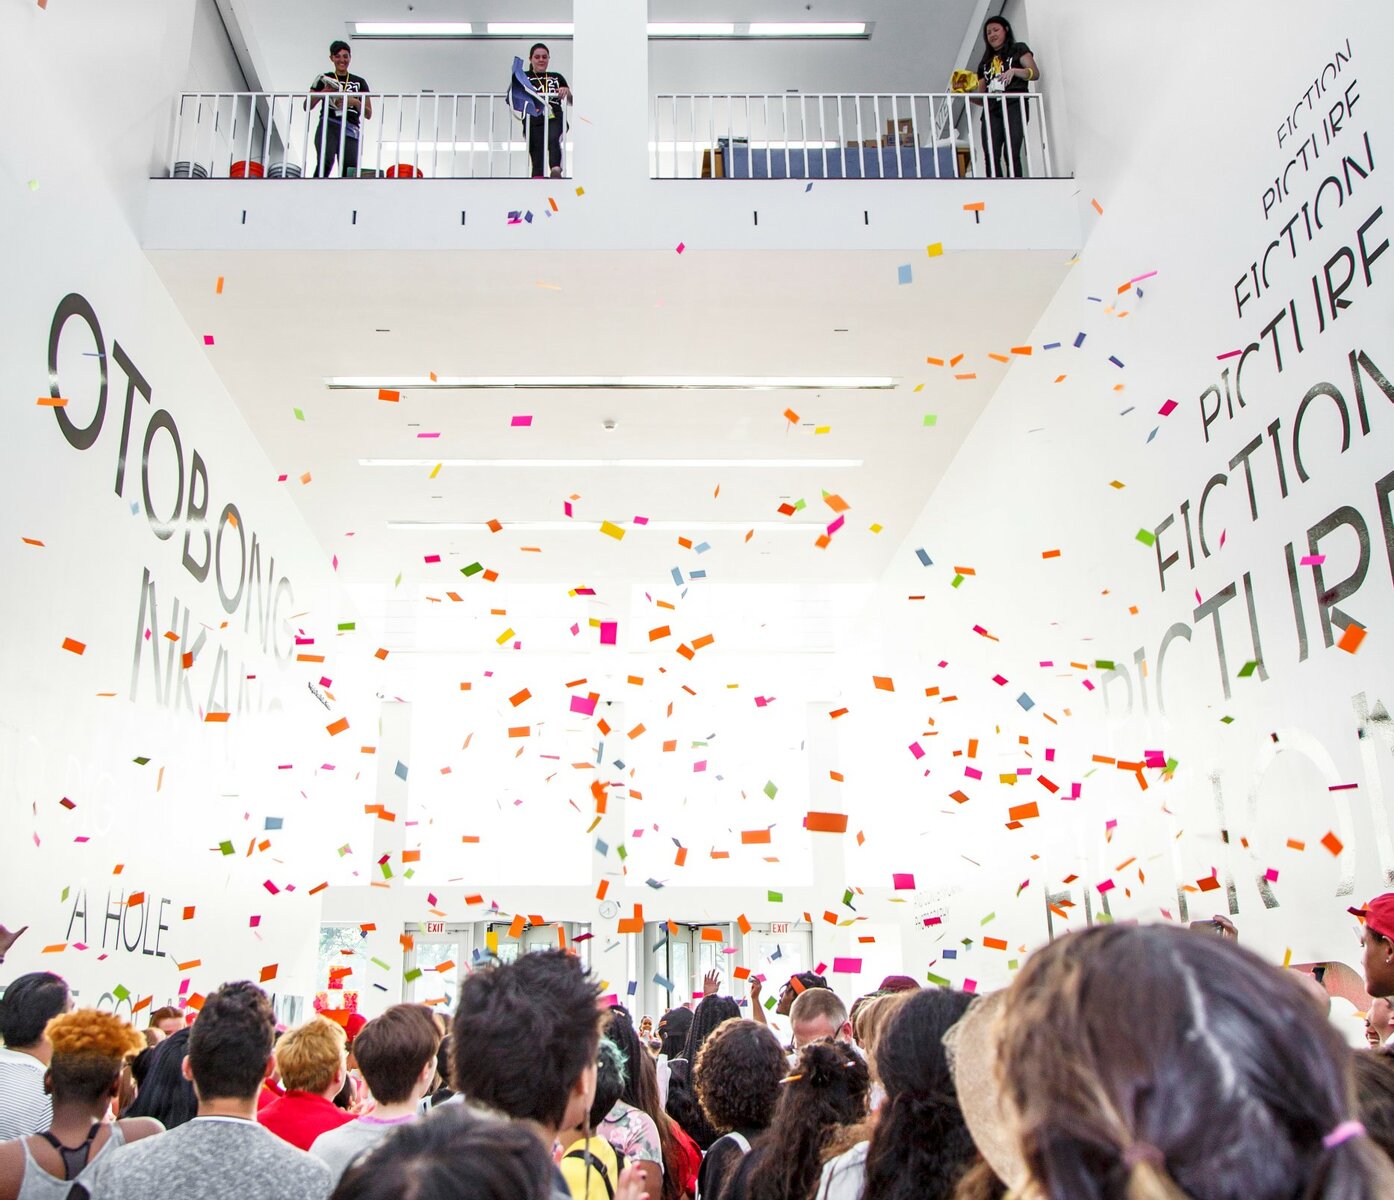 Colorful pieces of paper float over a crowd of people in a large, open white room.